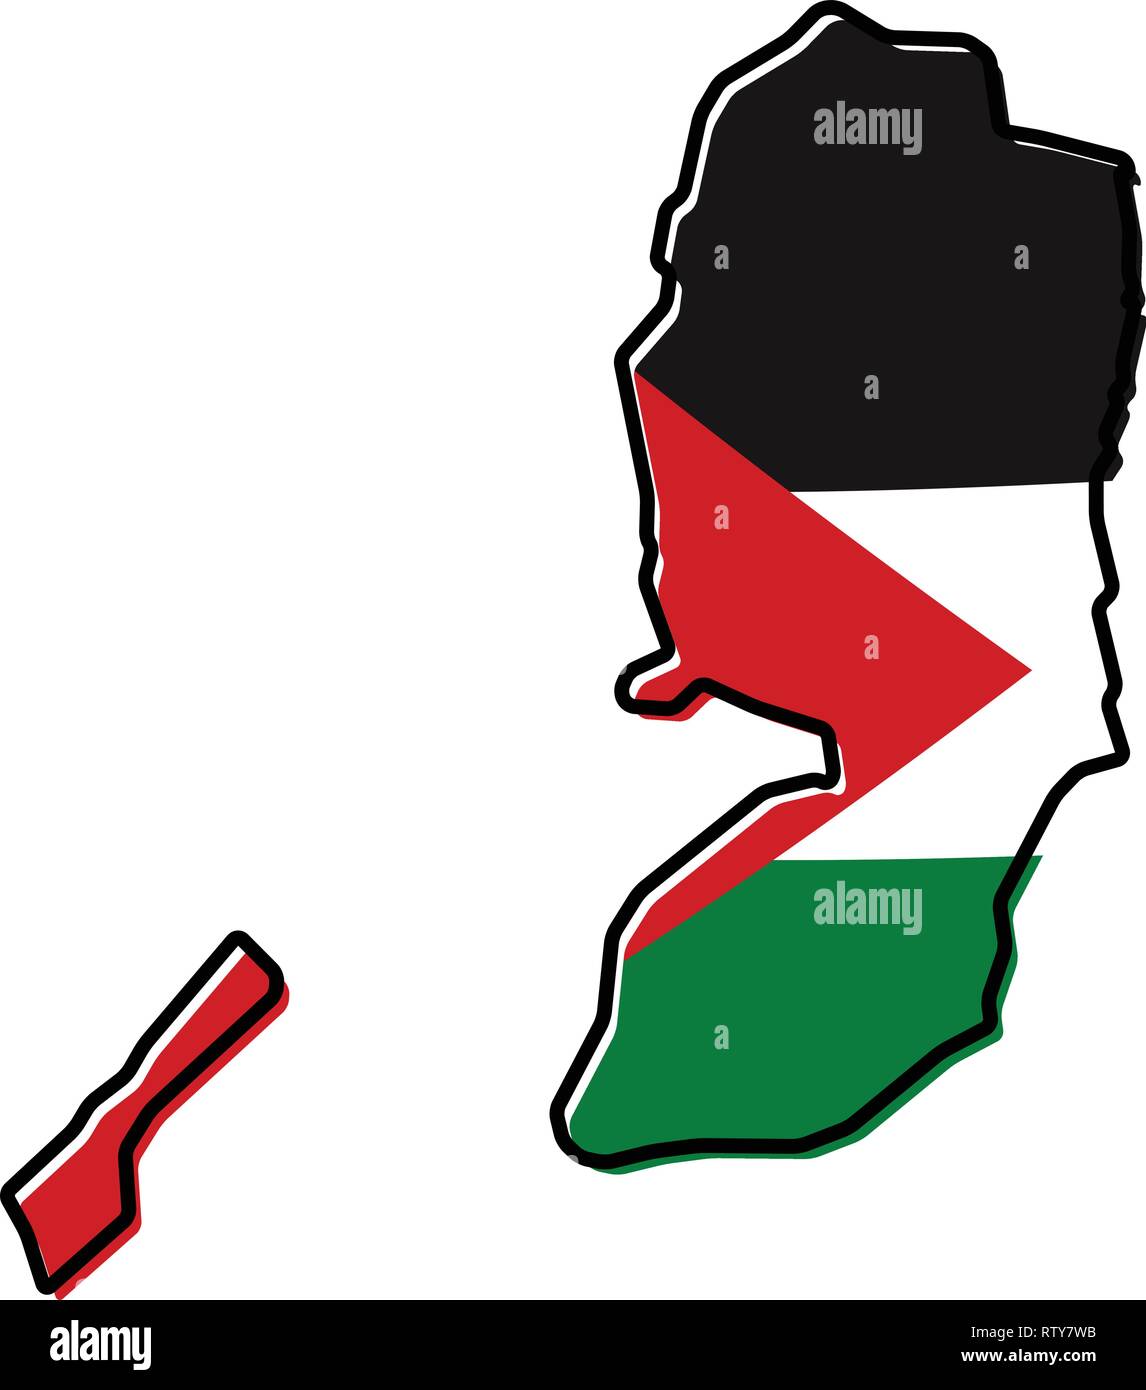 Simplified map of Palestine (West Bank and Gaza Strip) outline, with slightly bent flag under it. Stock Vector